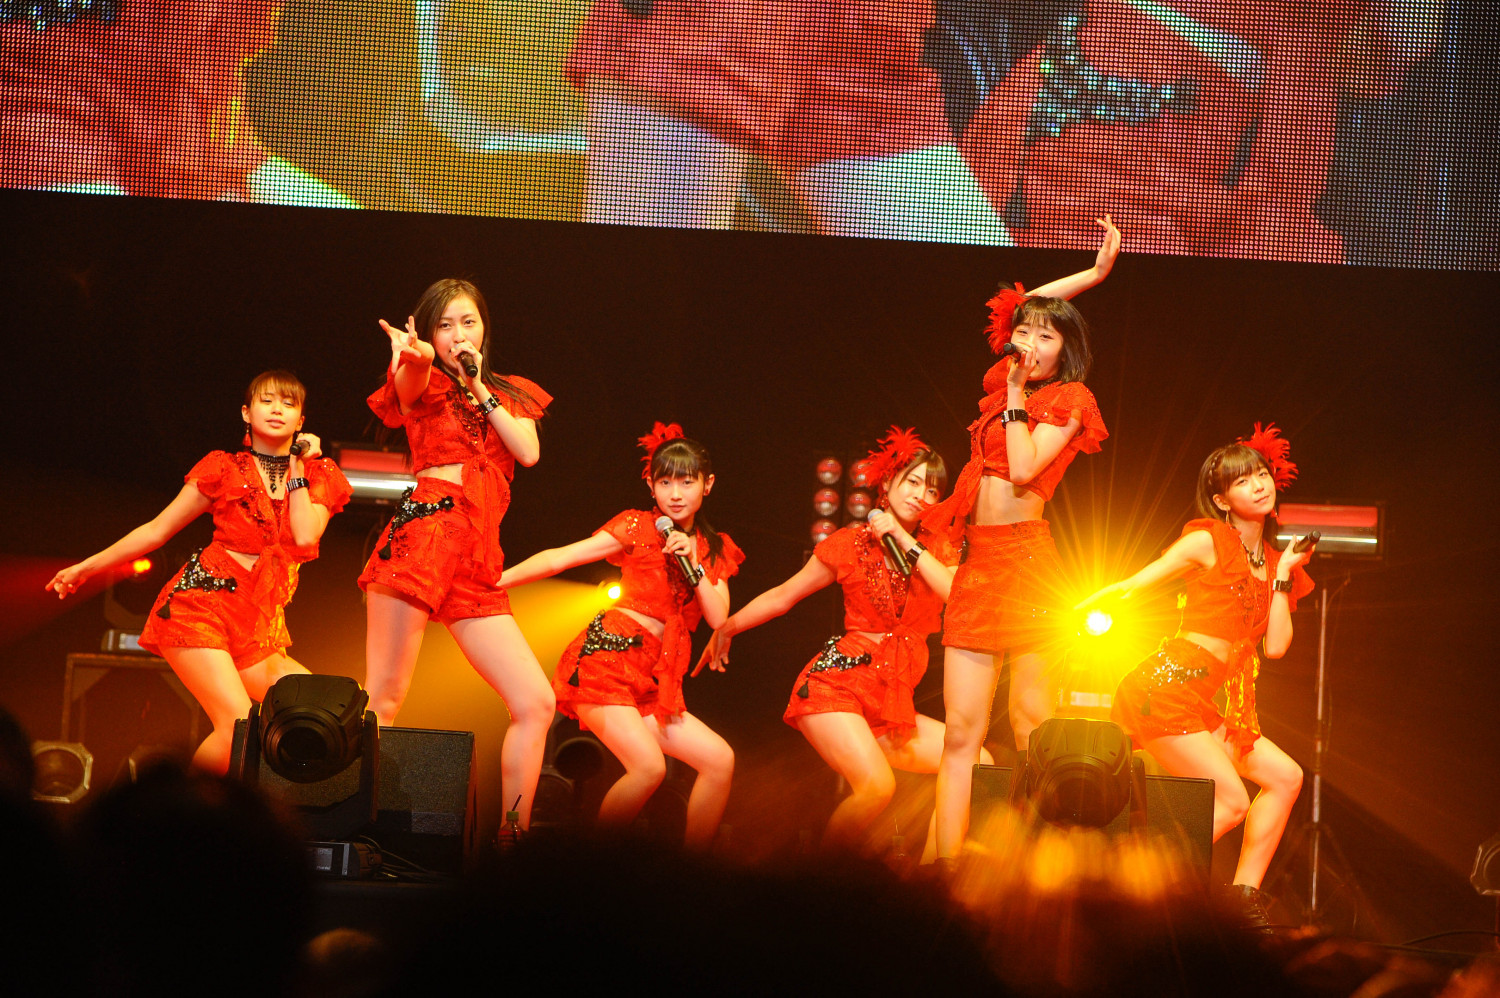 WANNA KNOW MY REAL LOVE : Juice=Juice @JAM EXPO 2017 Live Report